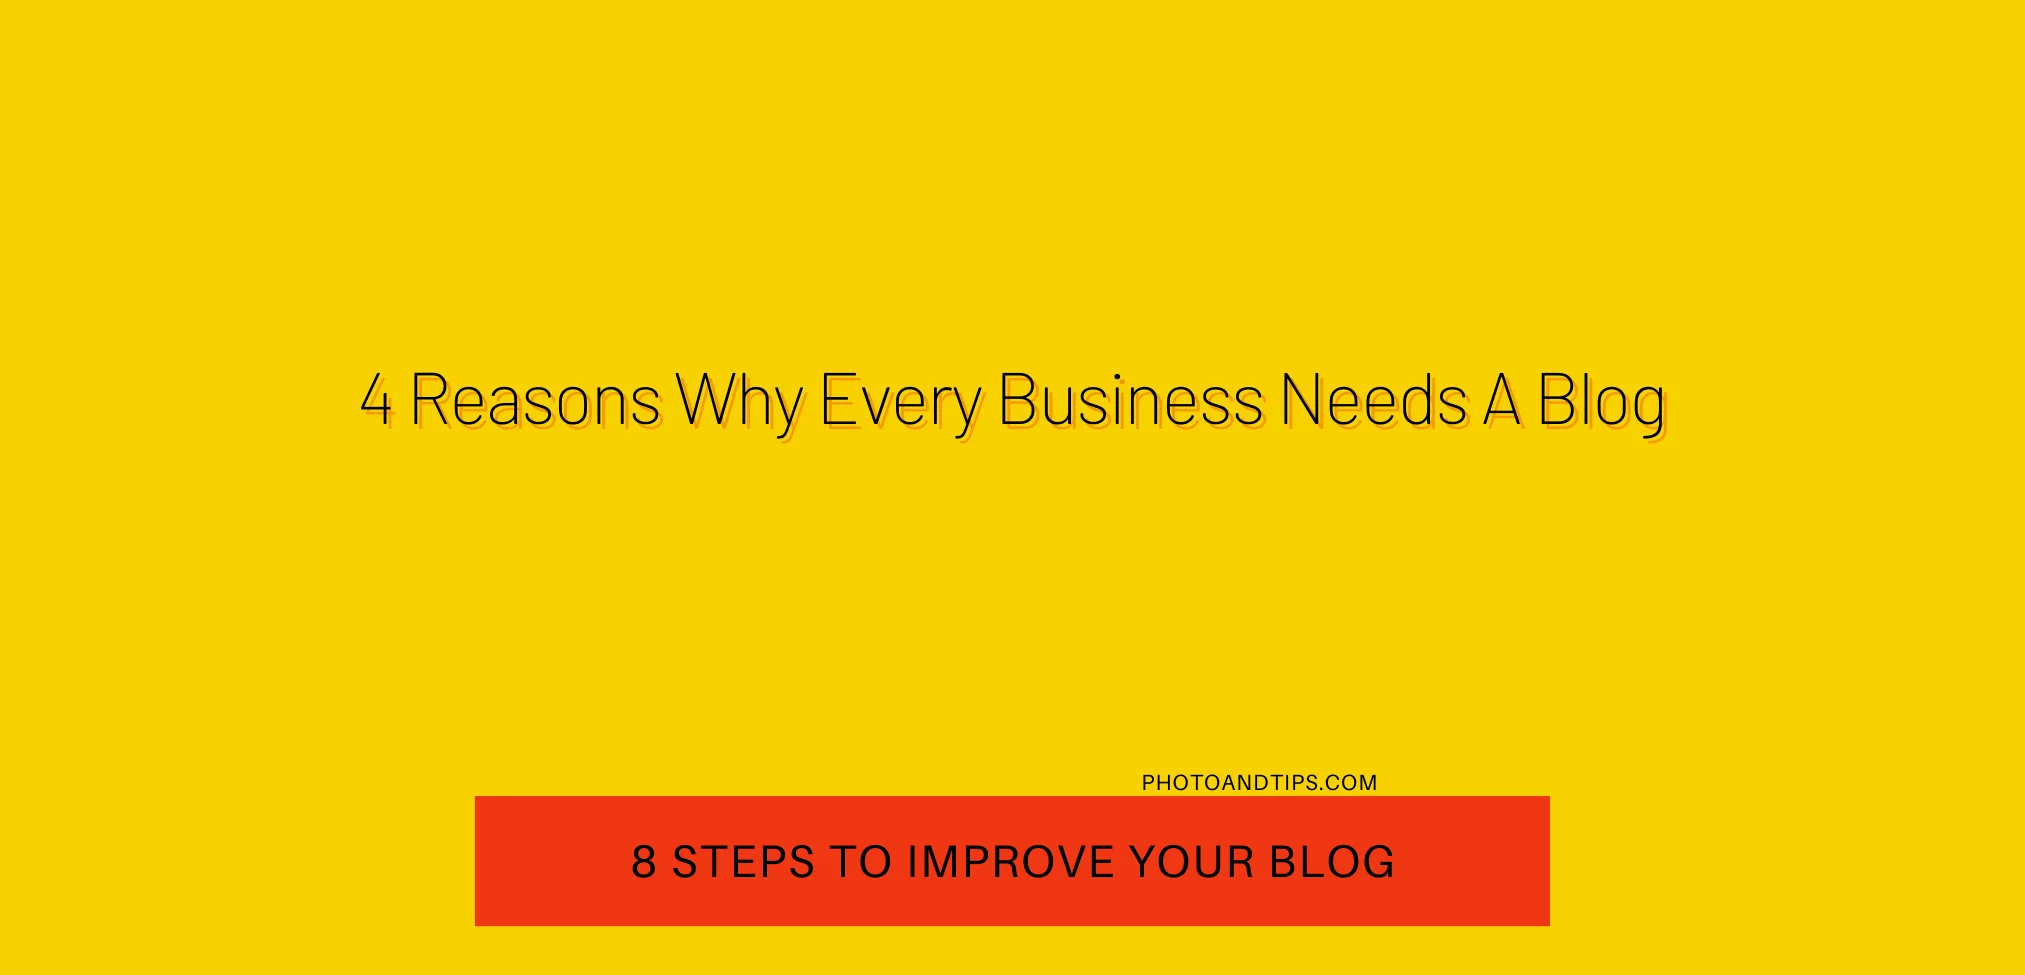 4 Reasons Why Every Business Needs A Blog - 8 Steps to Improve Your Blog